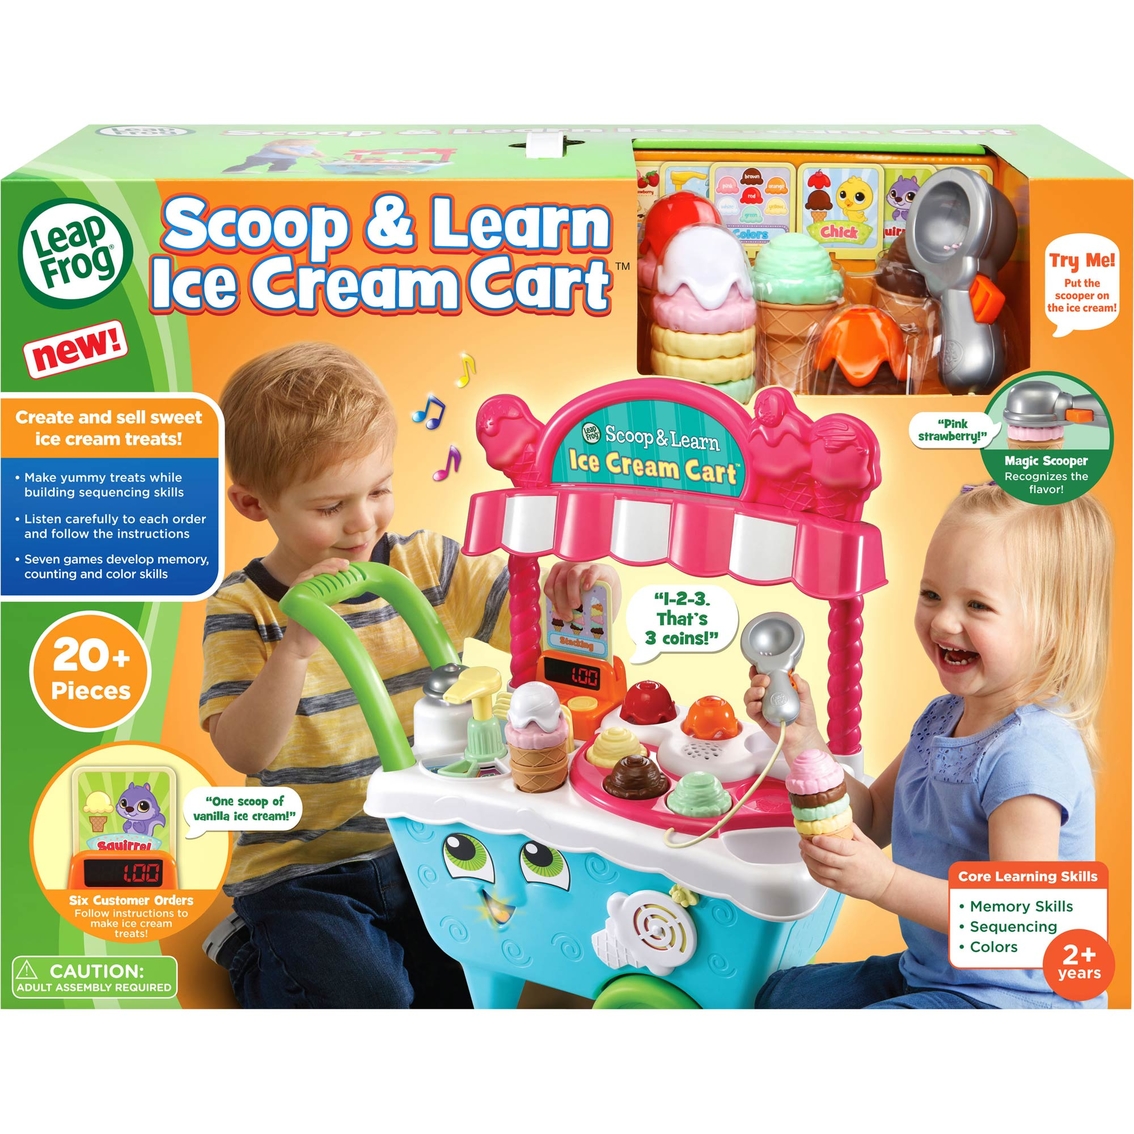 LeapFrog Scoop and Learn Ice Cream Cart - Image 2 of 2